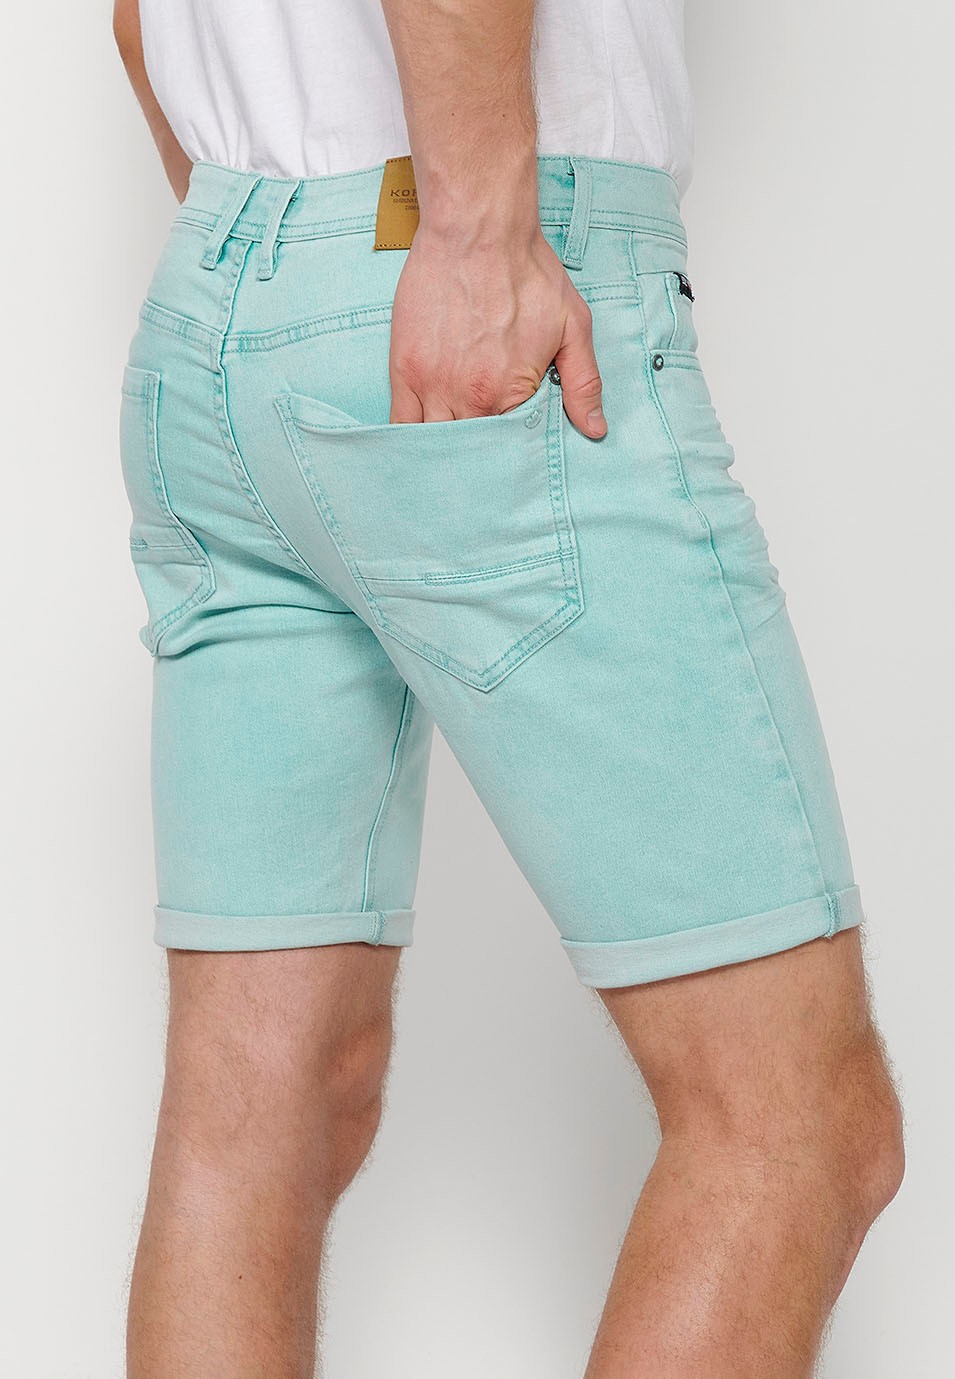 Shorts with turn-up closure with front zipper and button closure and five pockets, one blue pocket pocket for Men 7